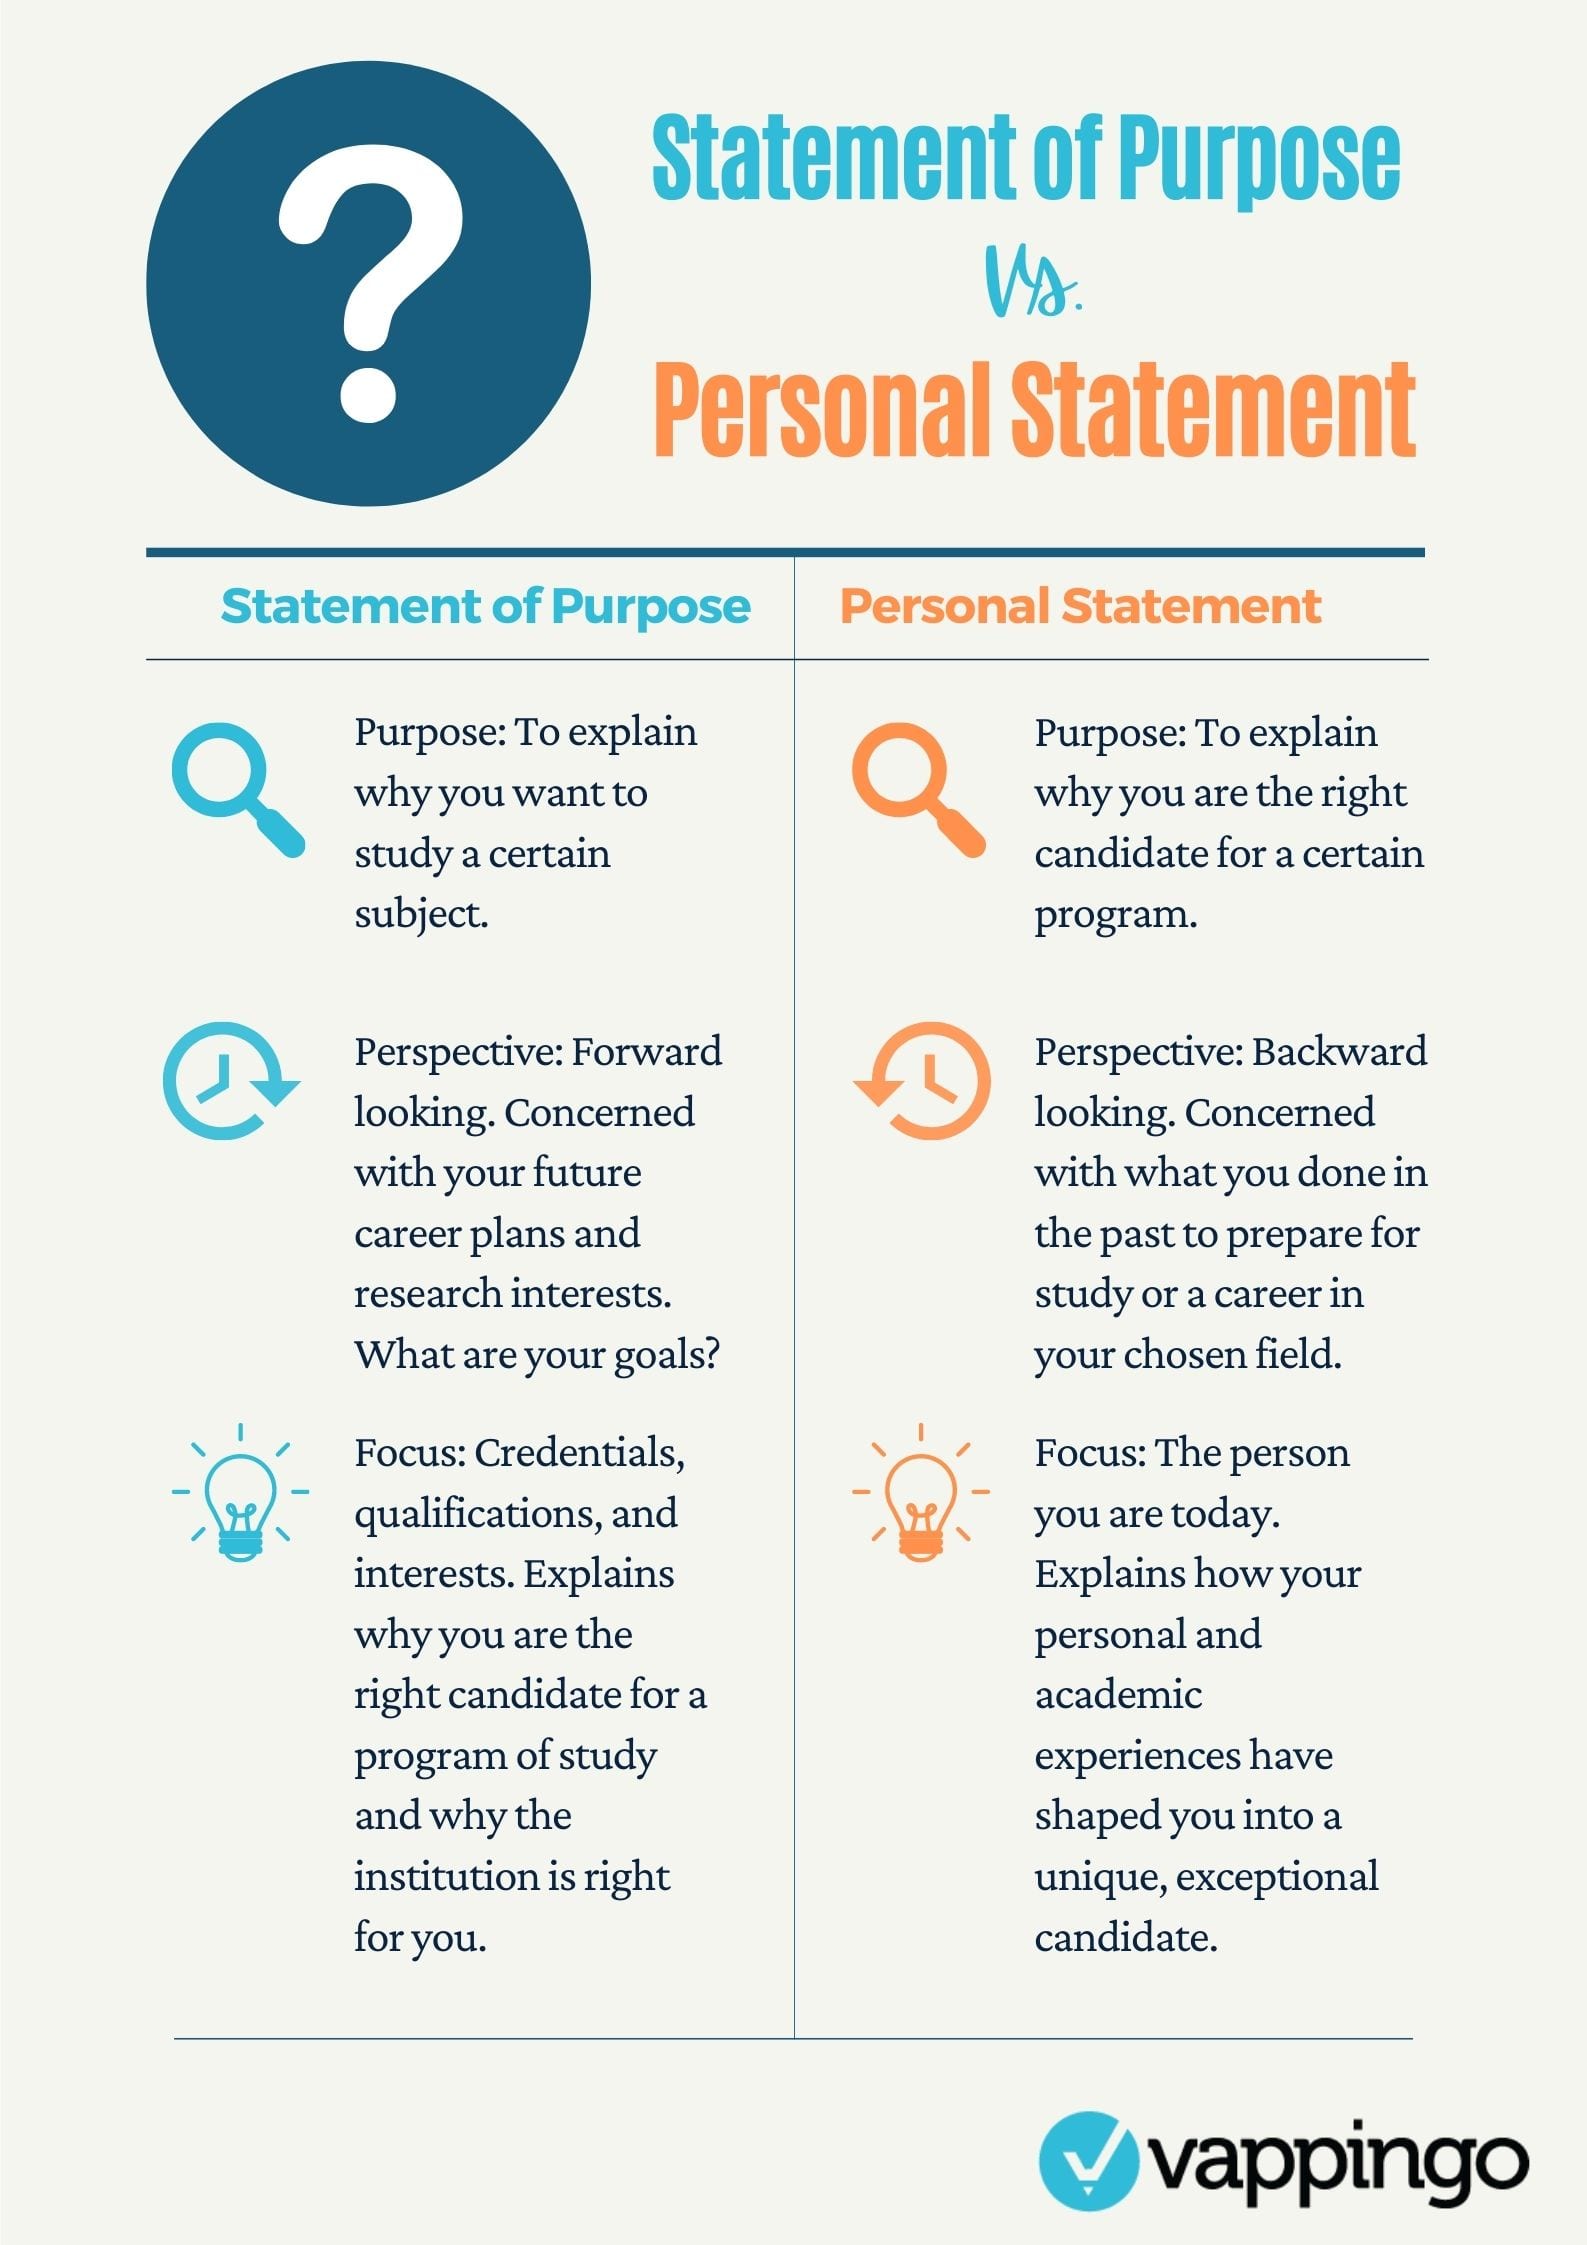 statement of purpose and personal statement difference